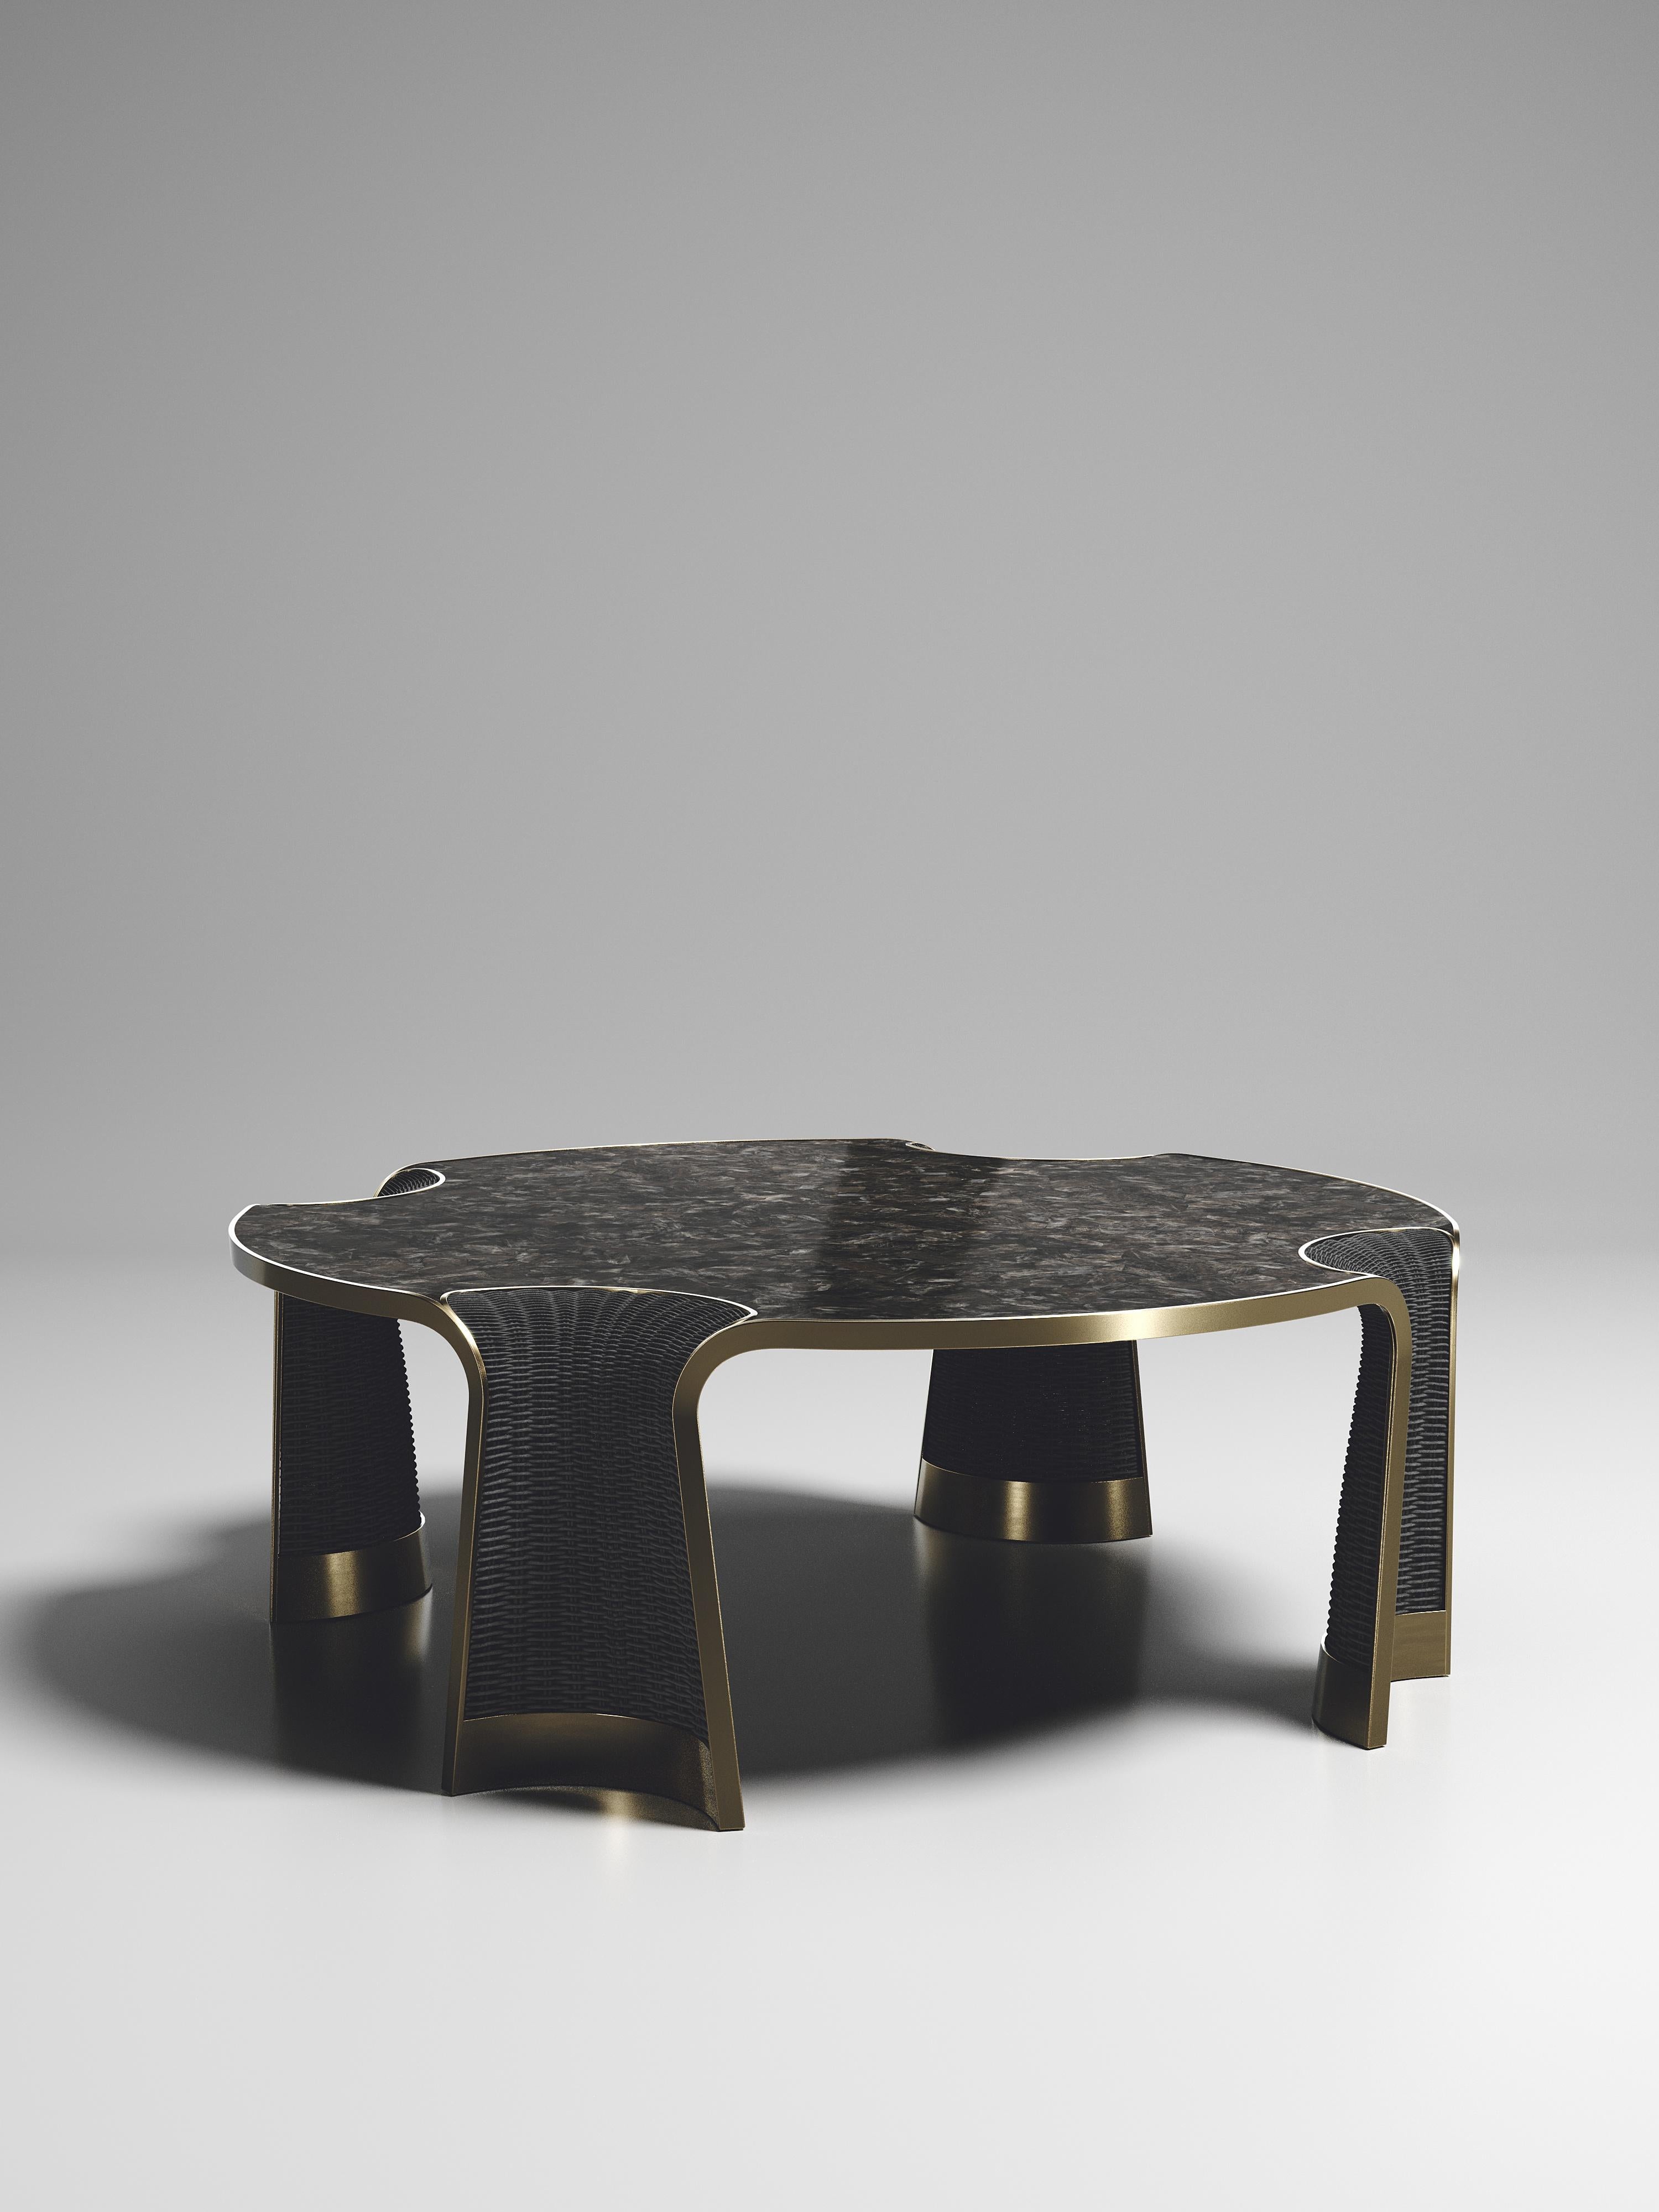 The Nymphea round coffee by R & Y Augousti is a part of their new Rattan capsule launch. The piece explores the brand's iconic DNA of bringing old world artisanal craft into a contemporary and utterly luxury feel. This table is done in a black